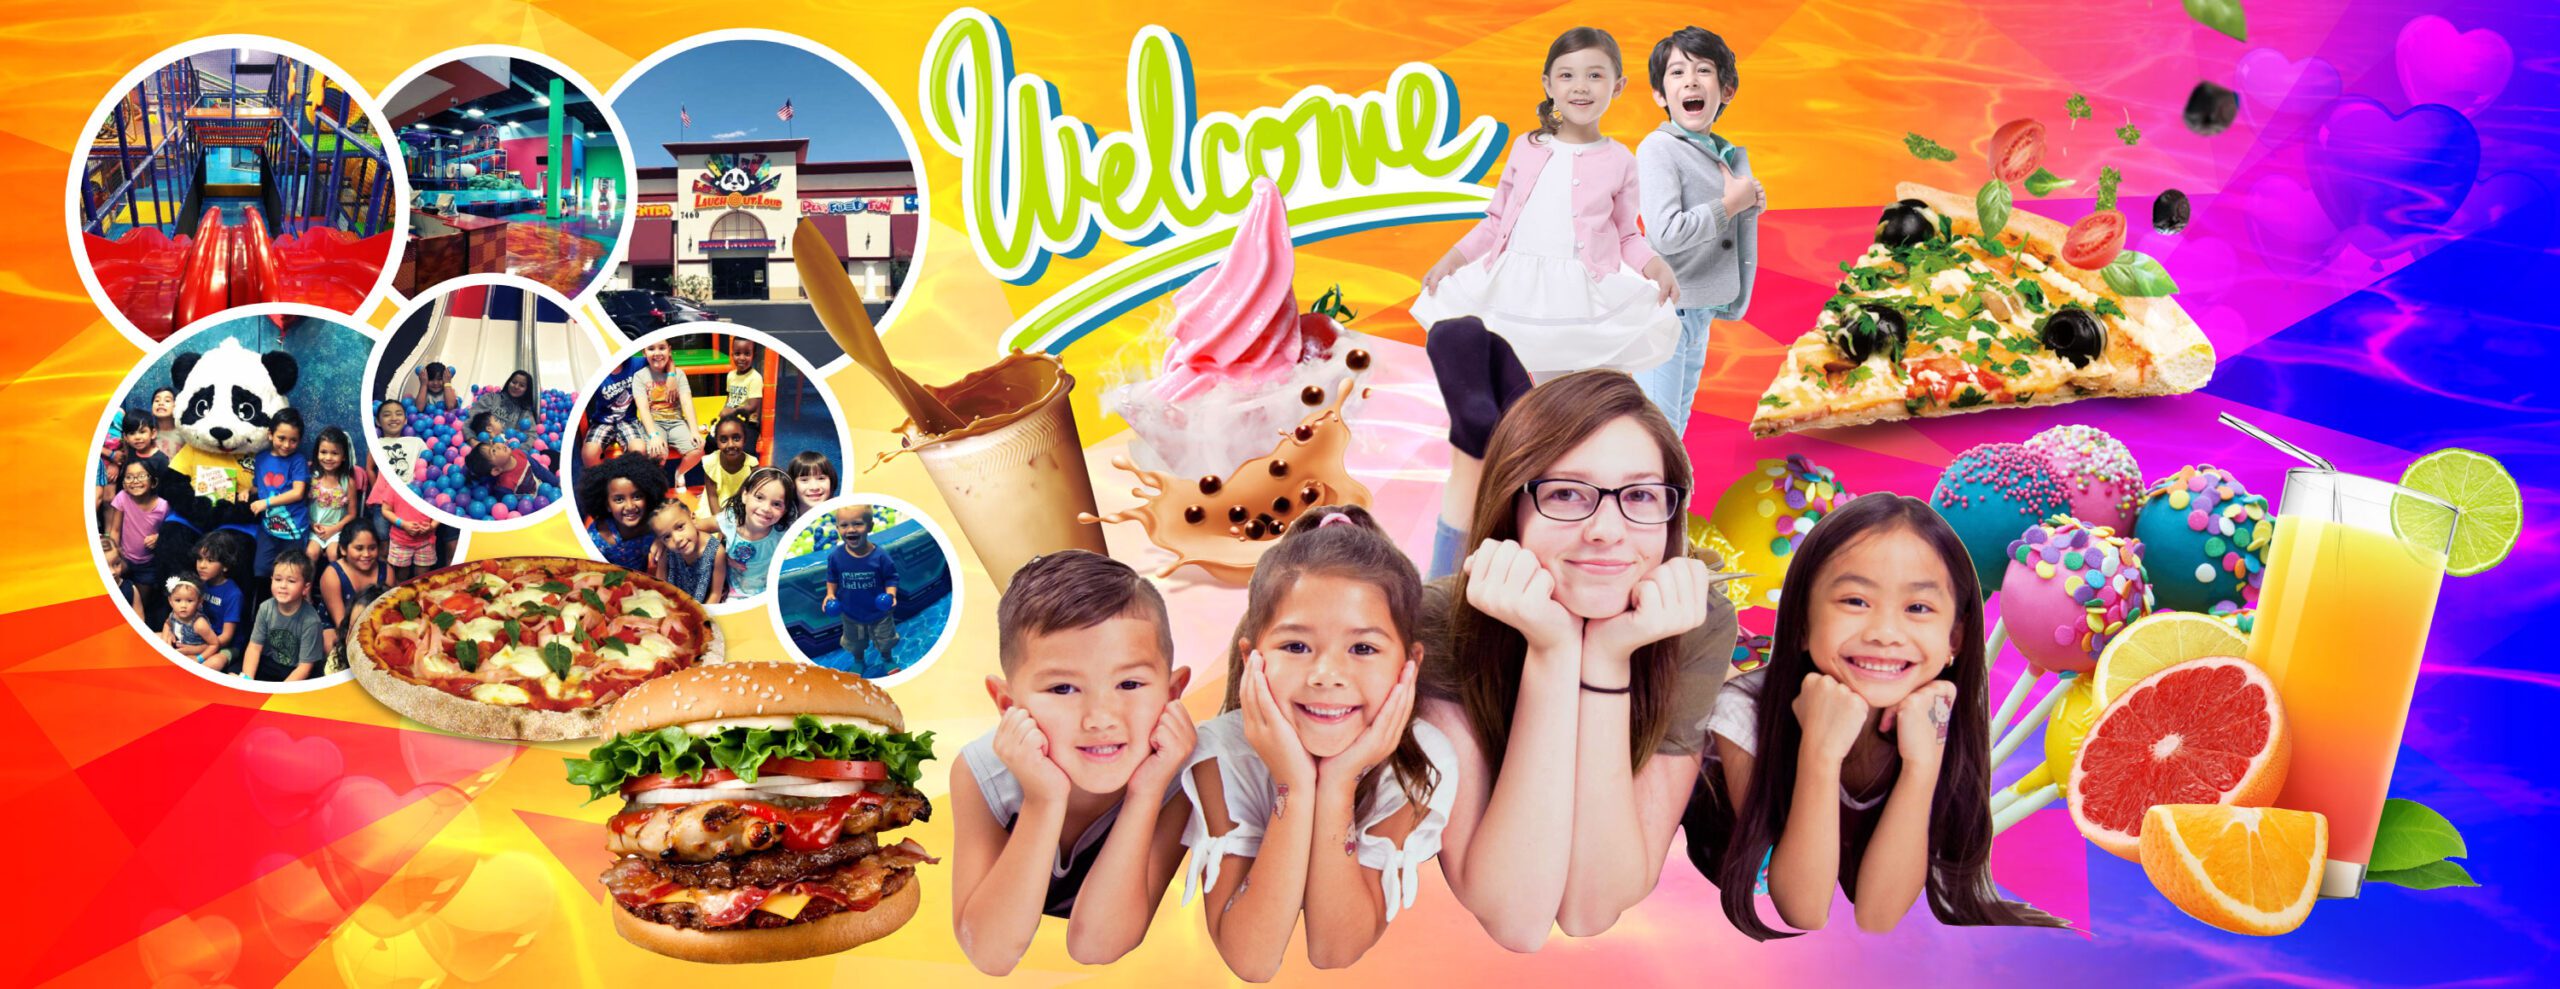 LOL Kids Club is a premier indoor playground family entertainment and event center with locations in Las Vegas, NV and Ontario, CA.